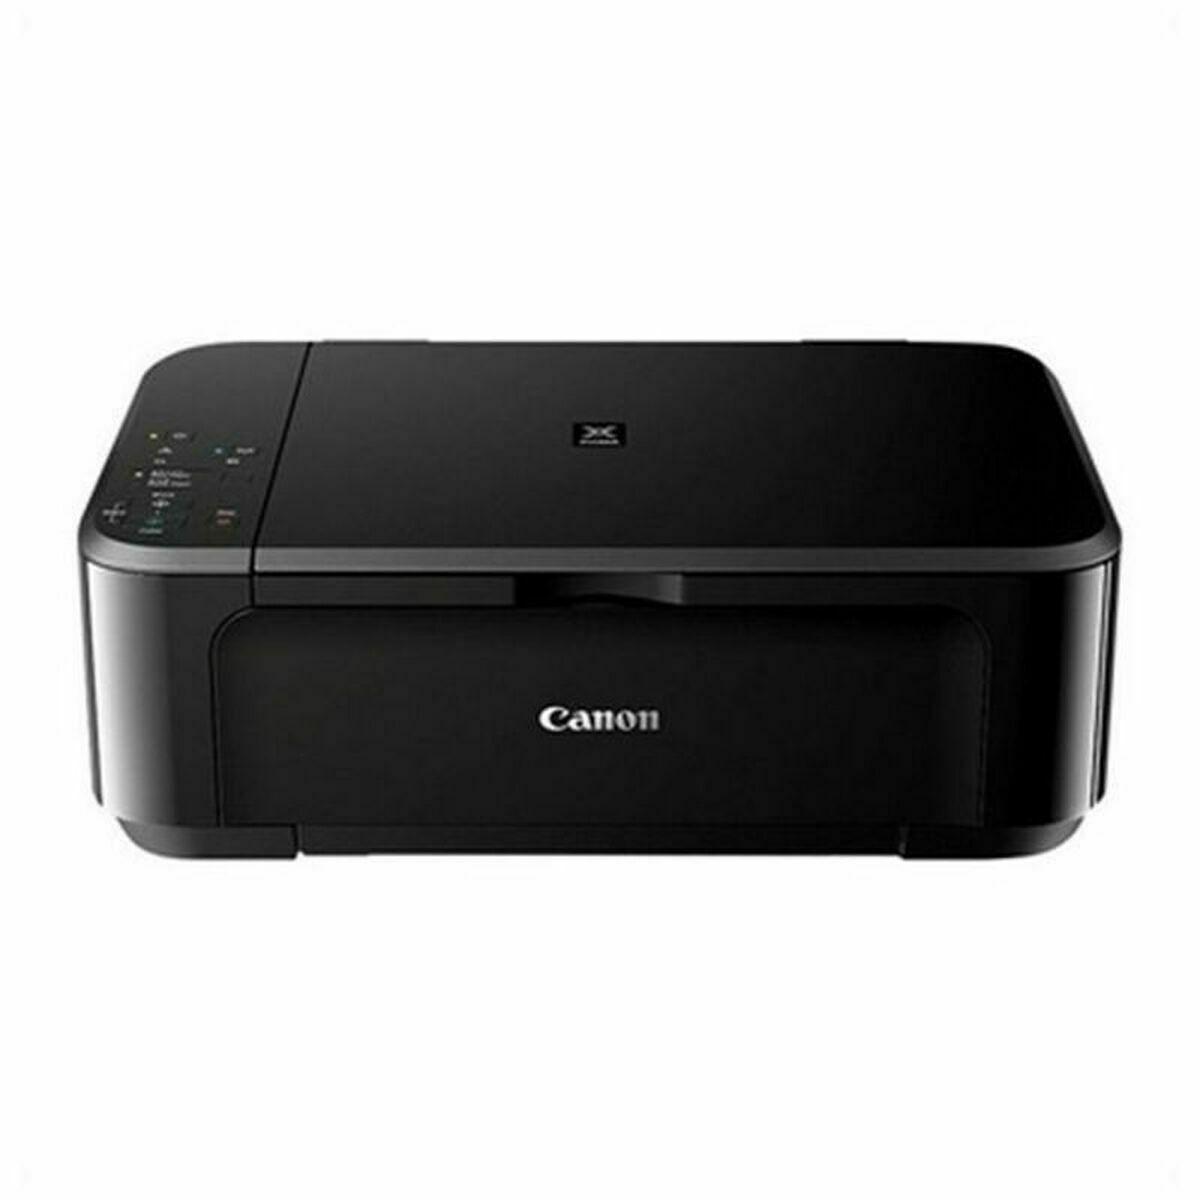 Multifunction Printer Canon Pixma MG3650S 10 ppm WIFI, Canon, Computing, Printers and accessories, multifunction-printer-canon-pixma-mg3650s-10-ppm-wifi, Brand_Canon, category-reference-2609, category-reference-2642, category-reference-2645, category-reference-t-19685, category-reference-t-19911, category-reference-t-21378, Colour_Black, Colour_White, computers / peripherals, Condition_NEW, office, Price_50 - 100, Teleworking, RiotNook